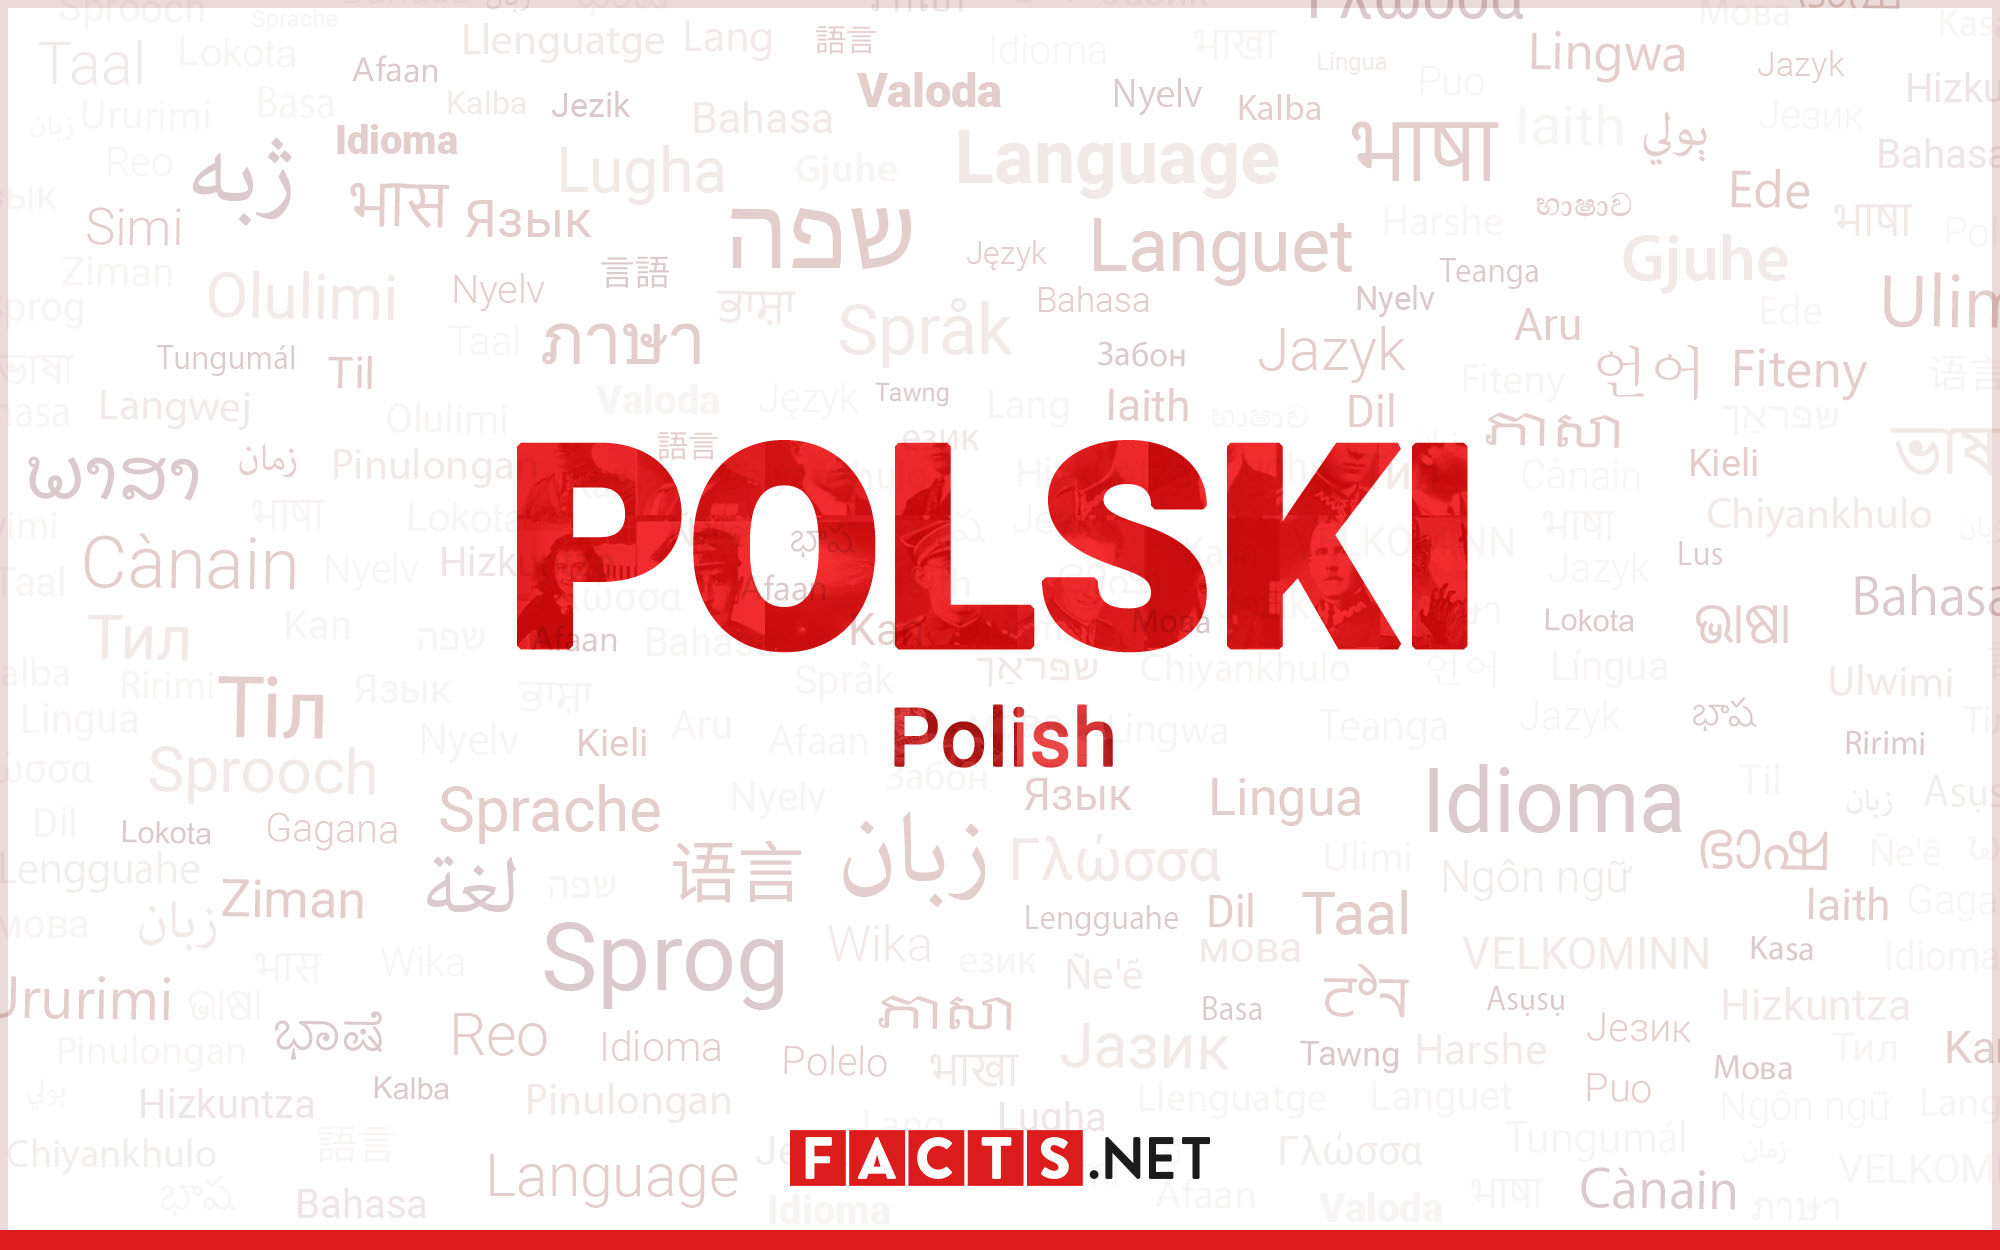 13-enigmatic-facts-about-polish-language